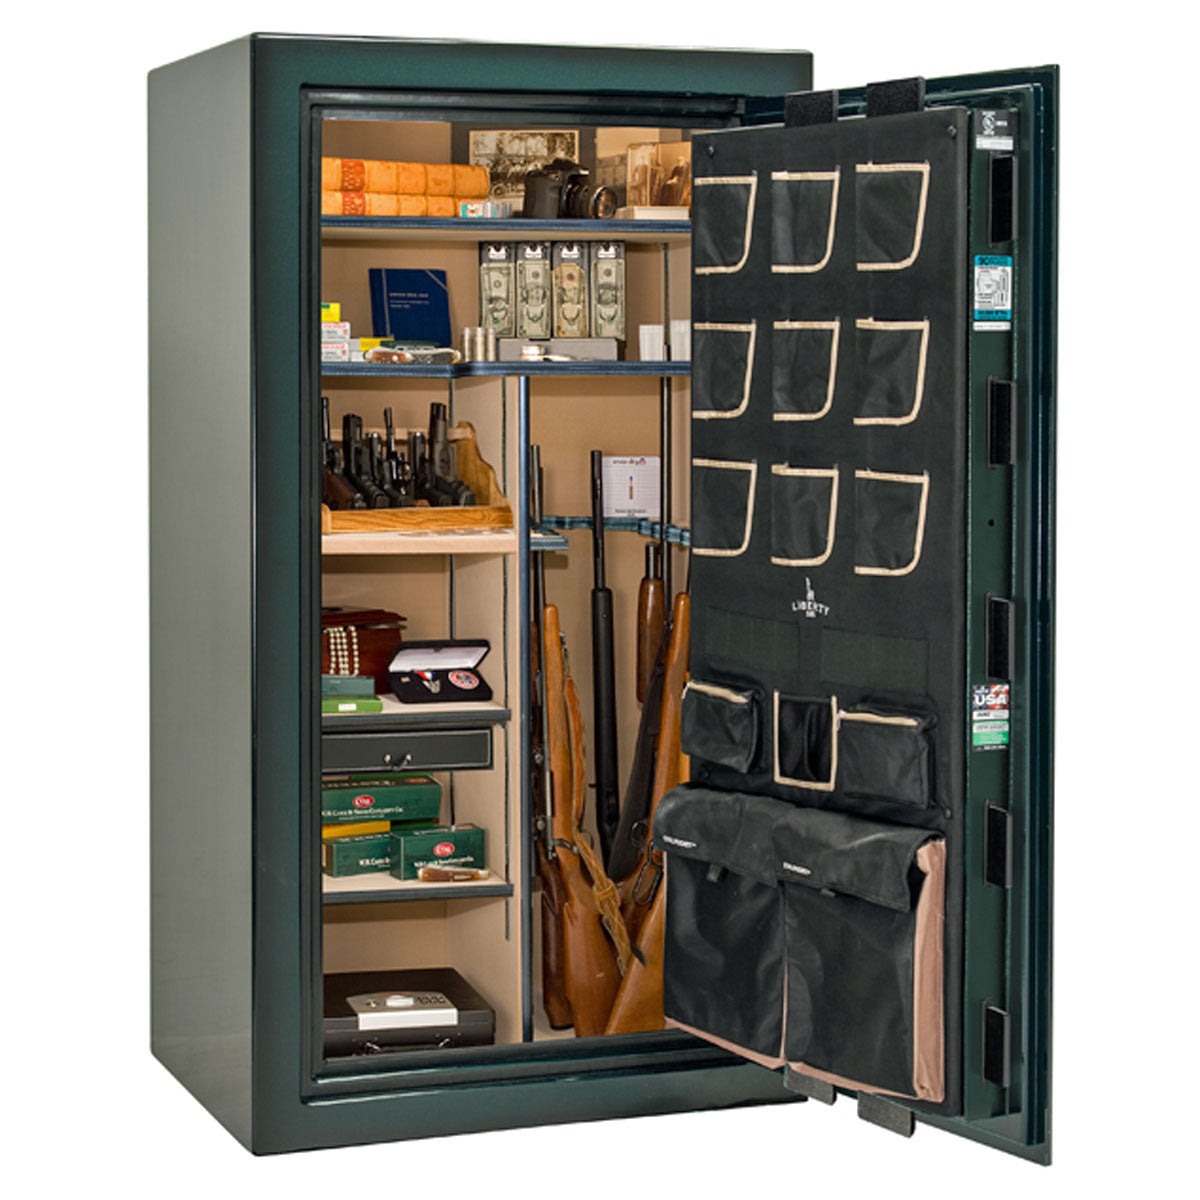 Liberty Safe Classic Plus 40 in Feathered Green Gloss, open door. 